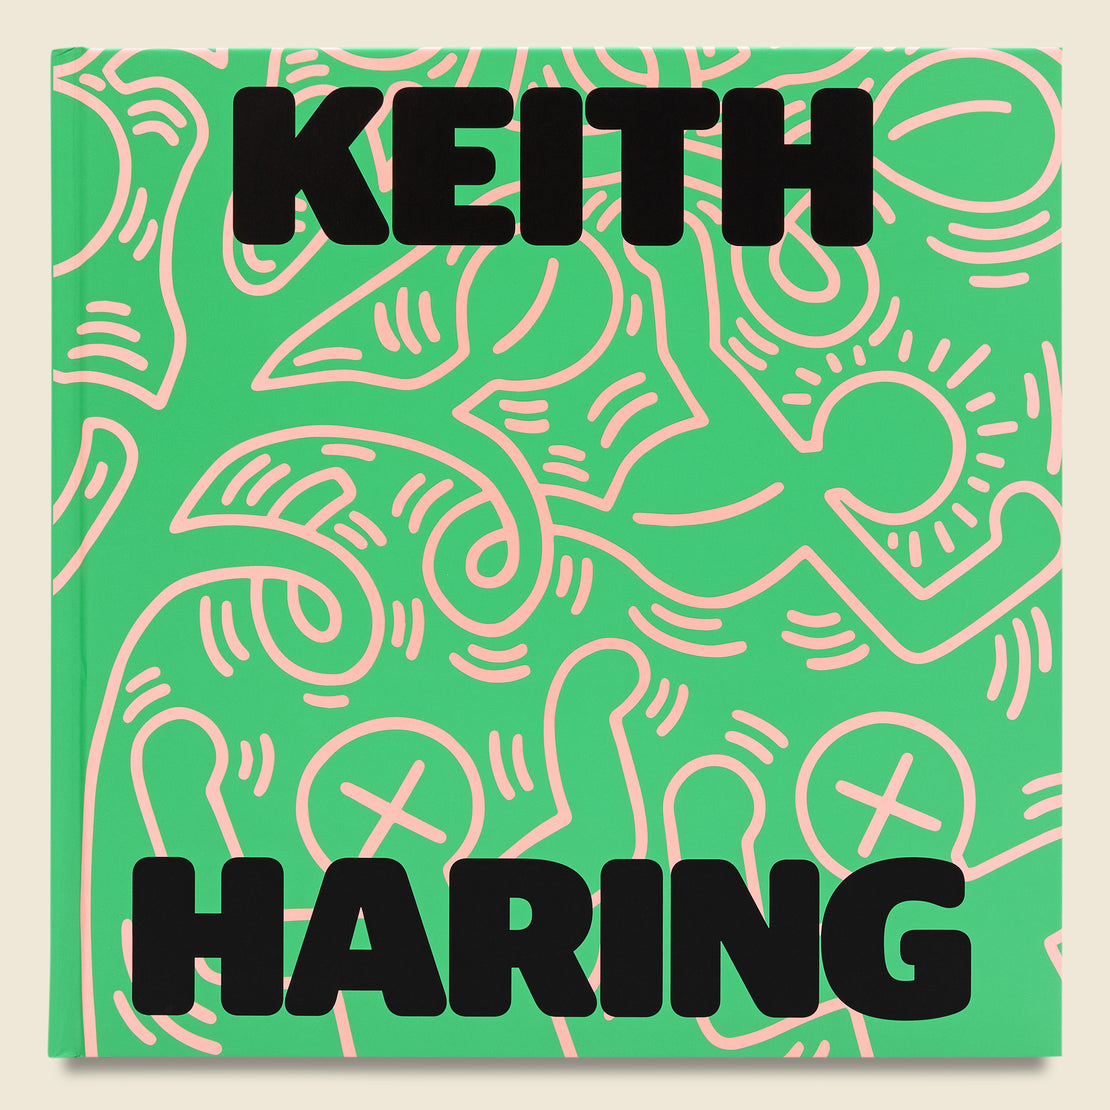 Bookstore Keith Haring